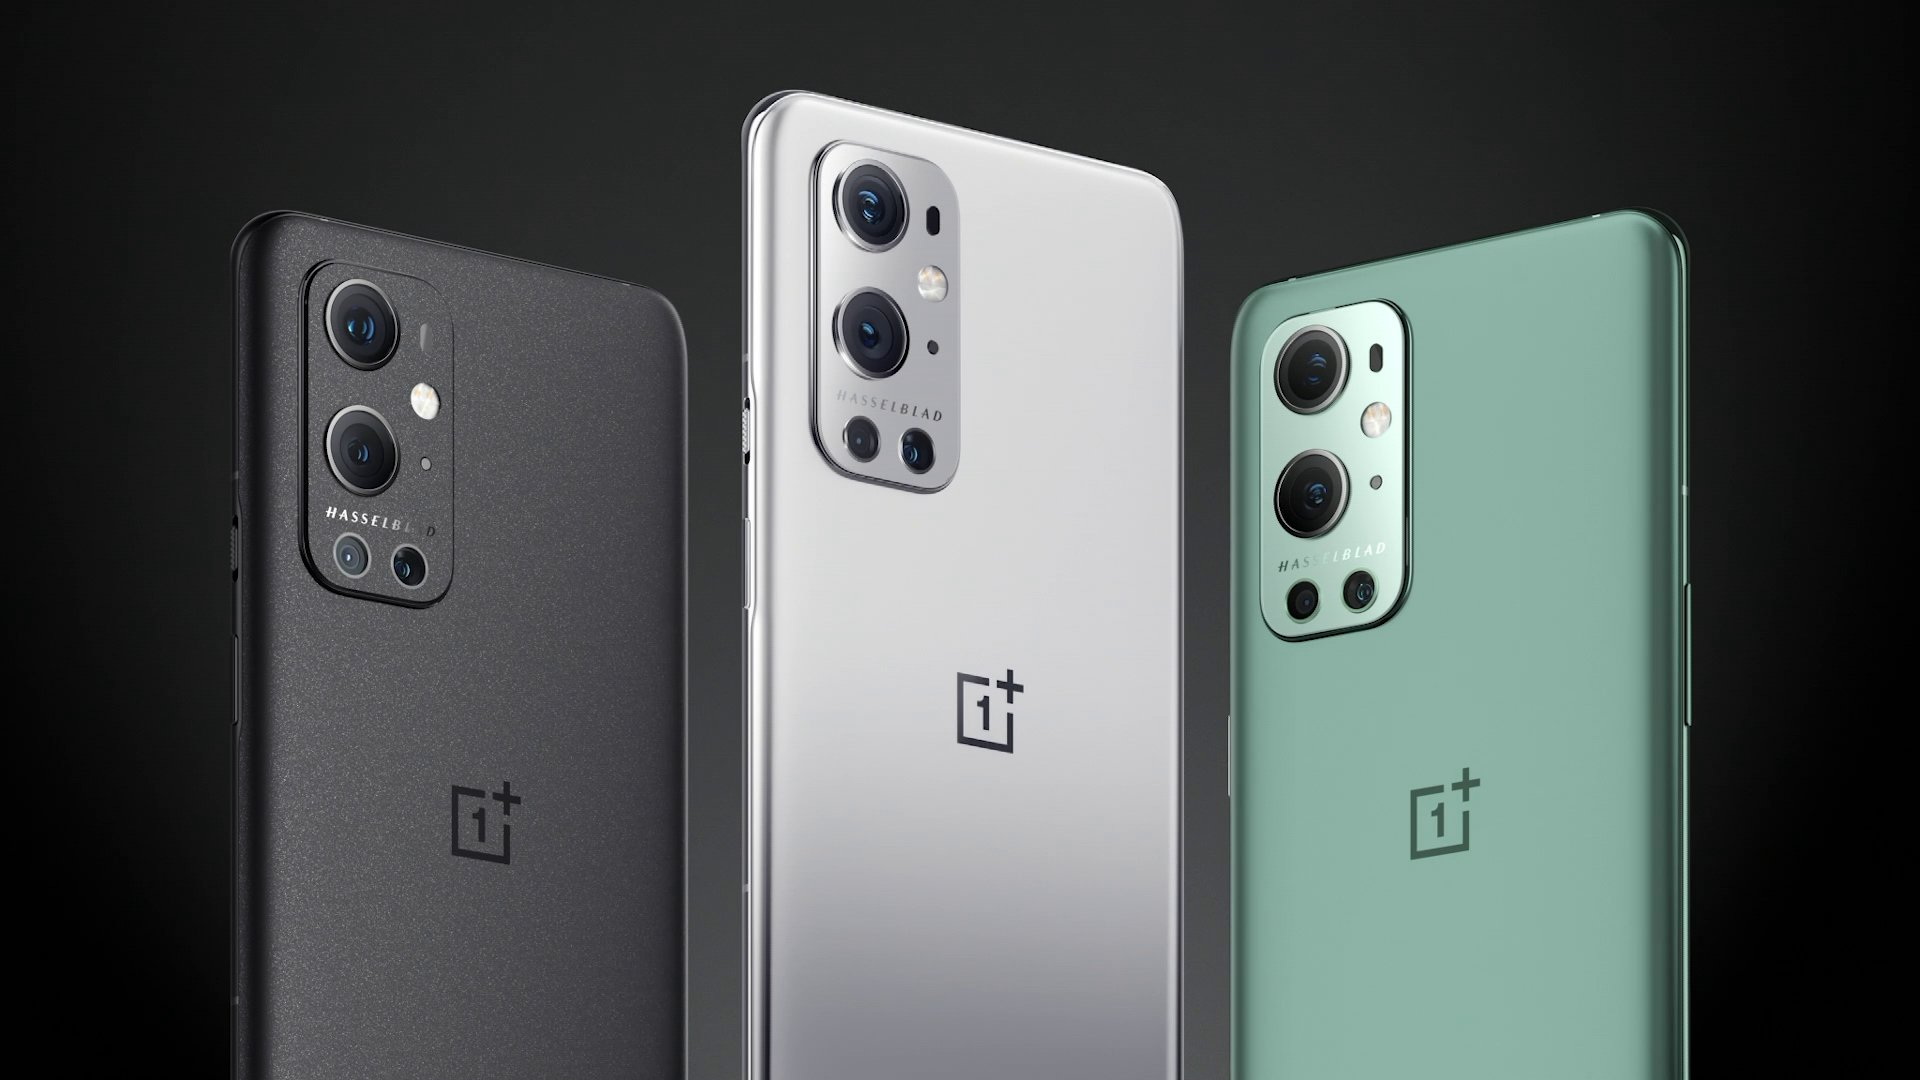 OnePlus has released a major update for the OnePlus 9 and 9 Pro flagships in the global market: what's new